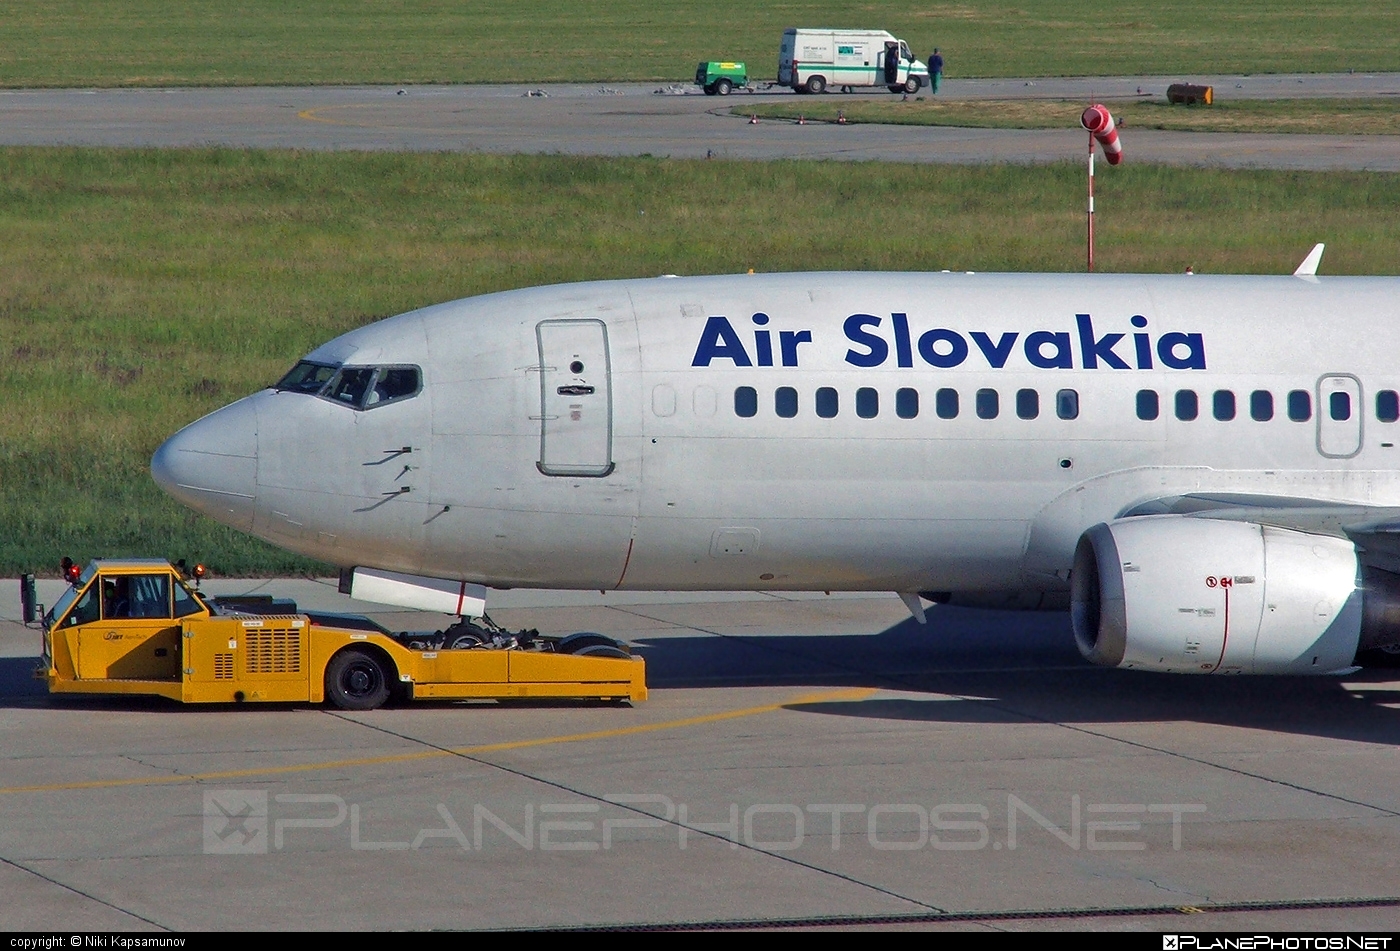 Boeing 737-300 - OM-ASD operated by Air Slovakia #b737 #boeing #boeing737